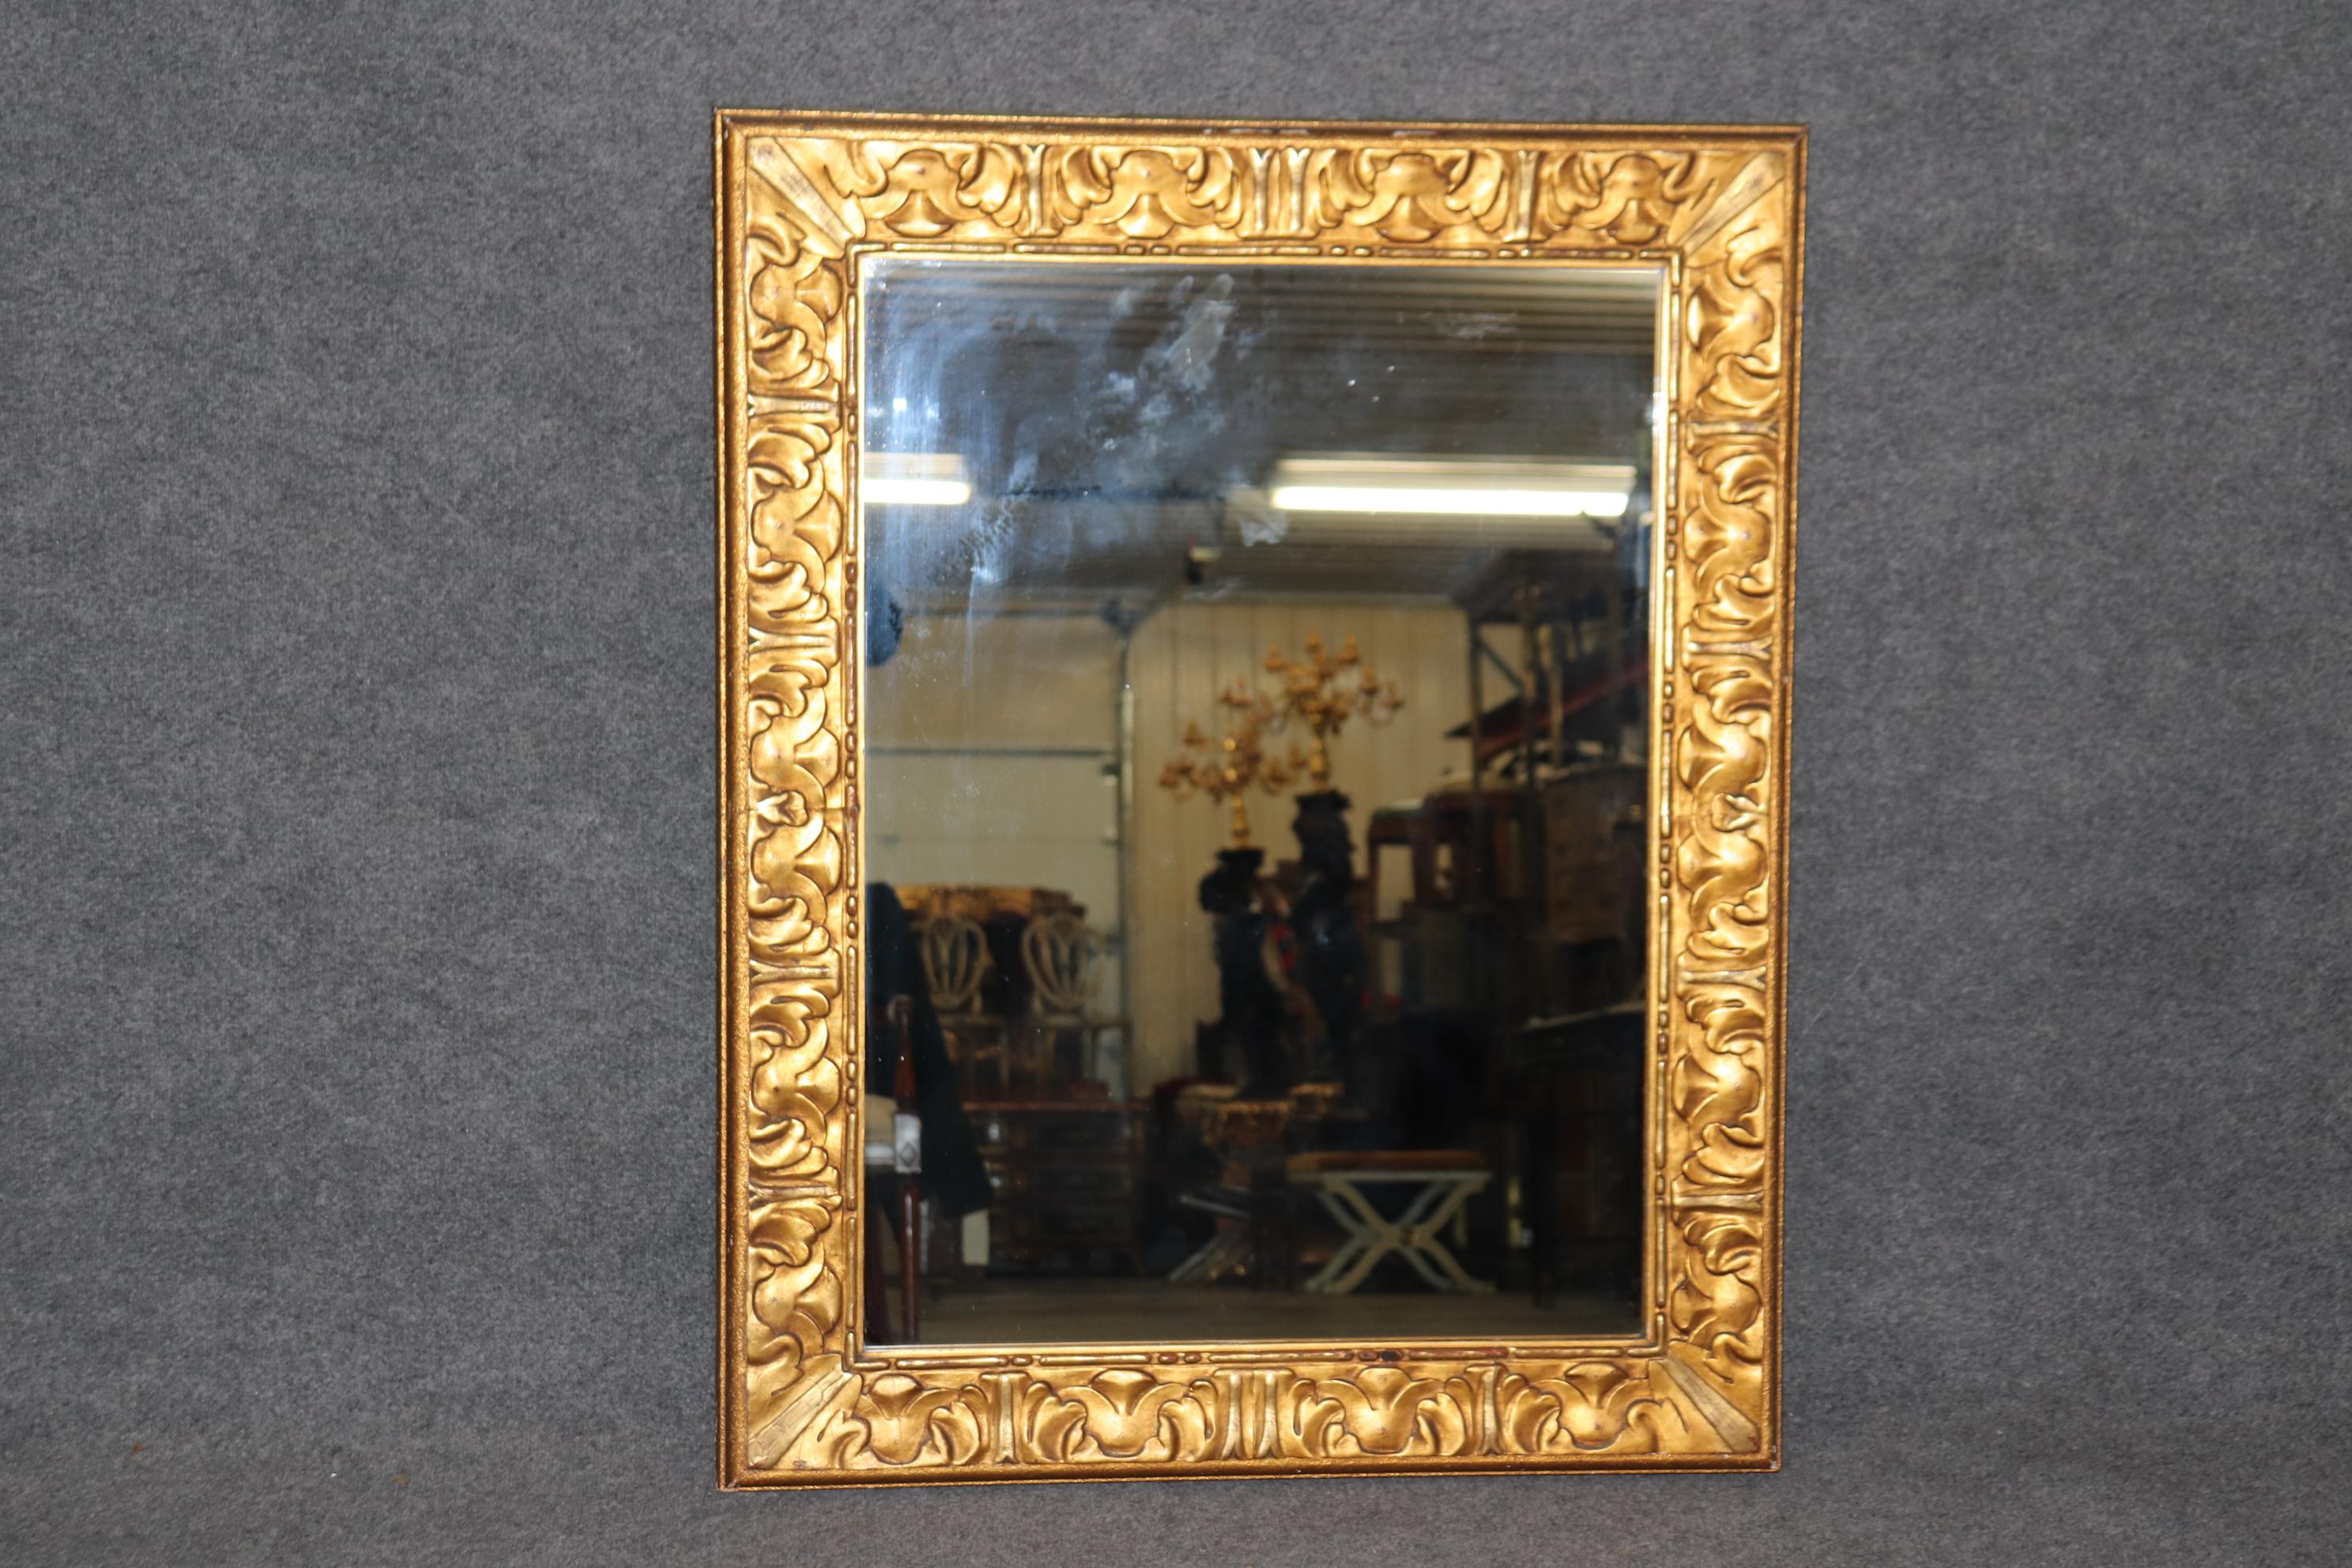 Dimensions- H:45 1/4in W: 36in D: 2 1/4in

This antique French Regency style carved distressed painted wall hanging mirror is made of the highest quality and is perfect for you and your home! This mirror is perfect to be used as a hallway mirror,